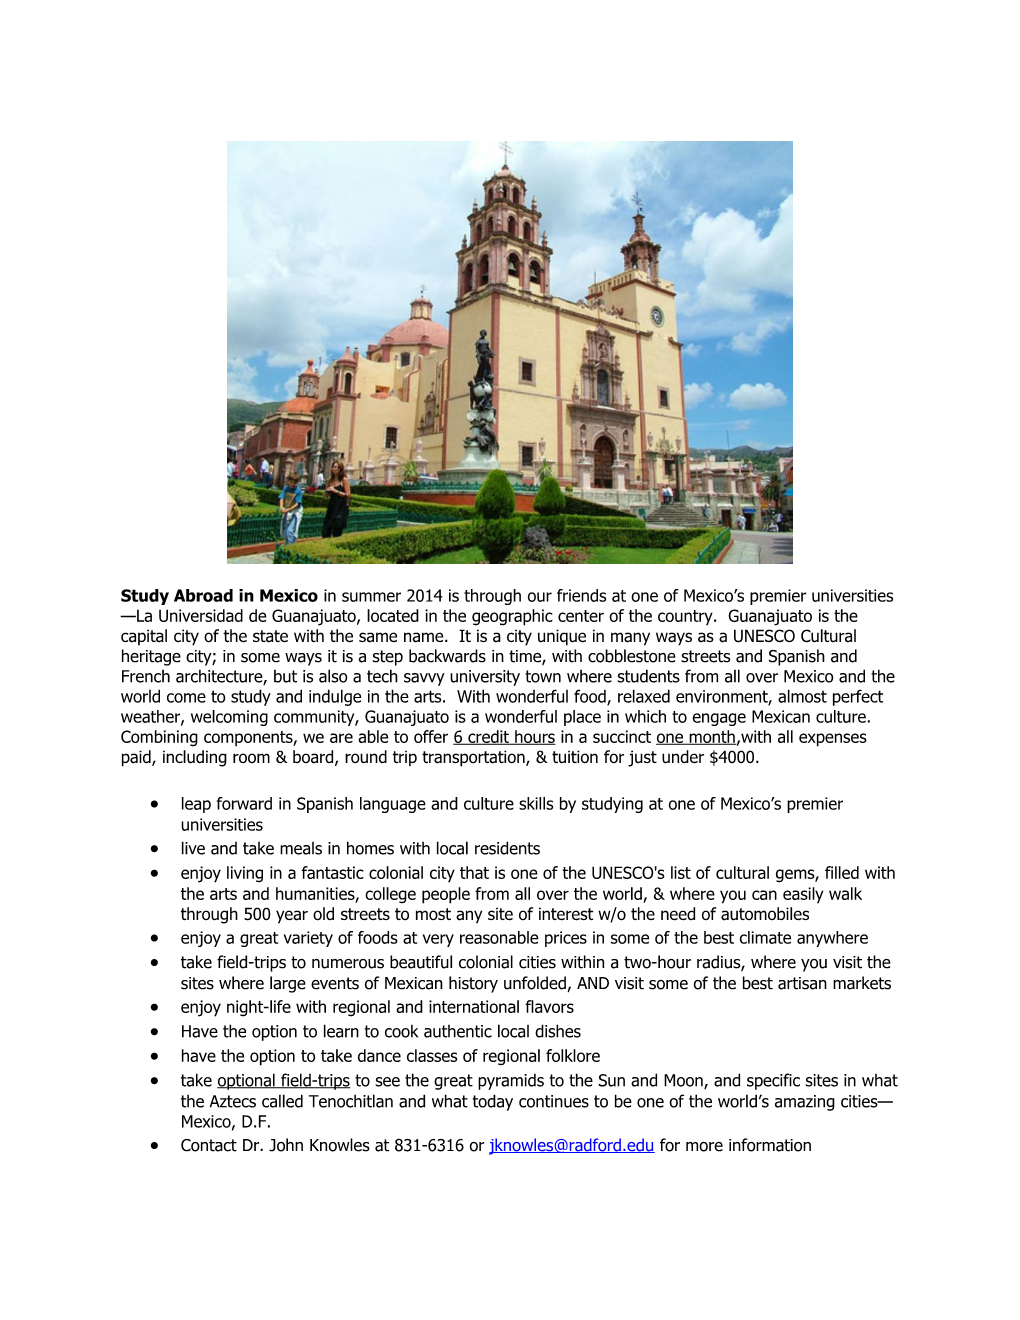 Study Abroad in Mexico in Summer 2014 Is Through Our Friends at One of Mexico S Premier